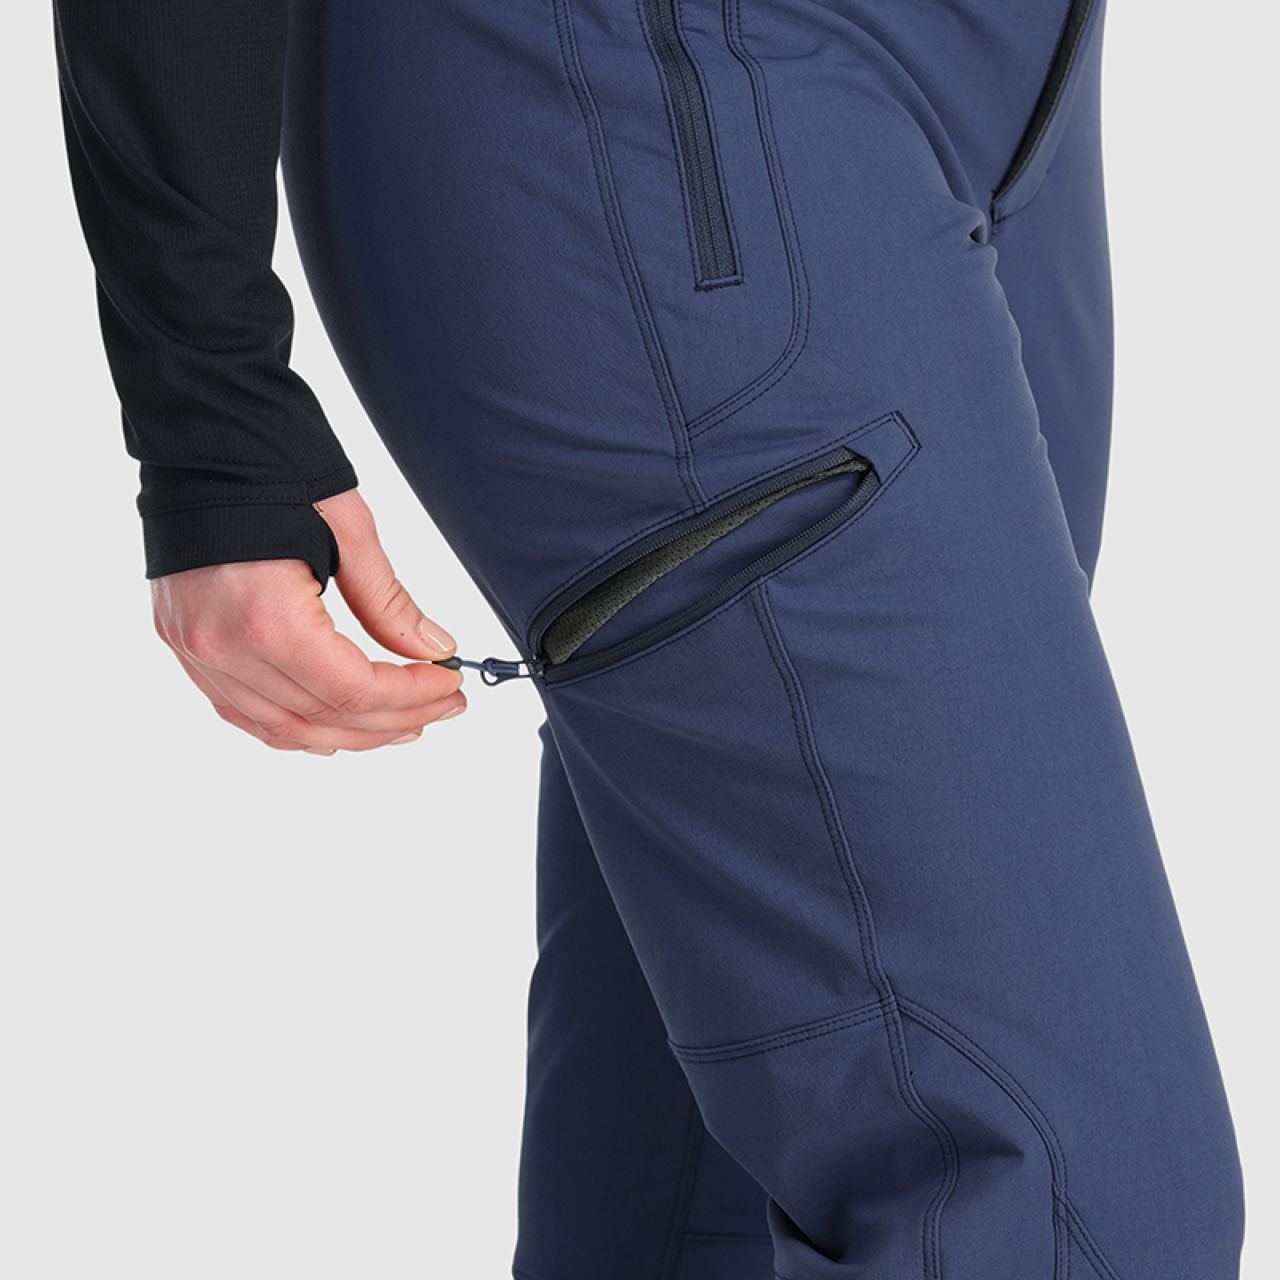 Outdoor Research Cirque II Softshell Pant - Women's - Clothing